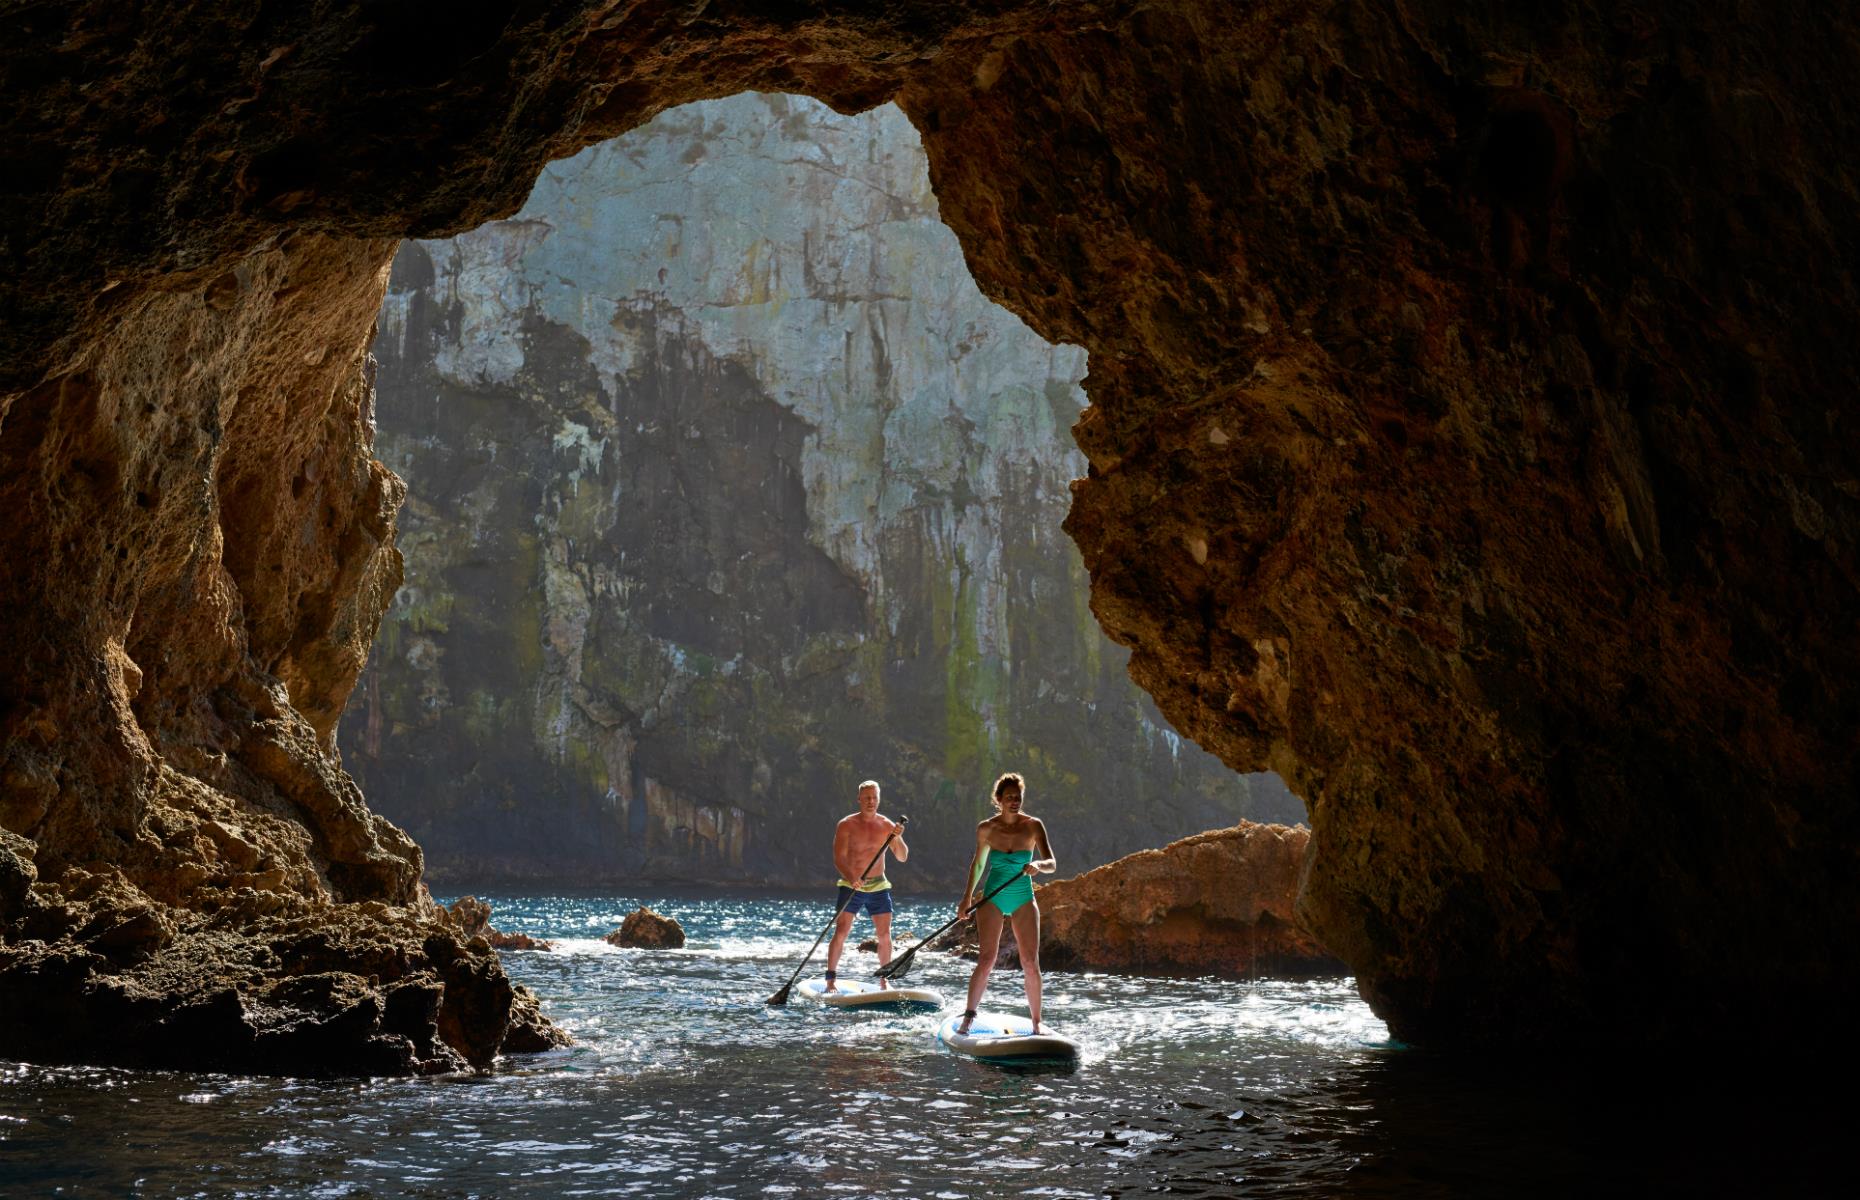 New Zealand has caught the stand-up paddleboarding (SUP) bug and although you can hire boards in loads of places, the Tutukaka coast and Poor Knights Islands are simply spectacular. Go by boat out to the Marine Reserve and then jump on boards to explore craggy hidden sea caves.